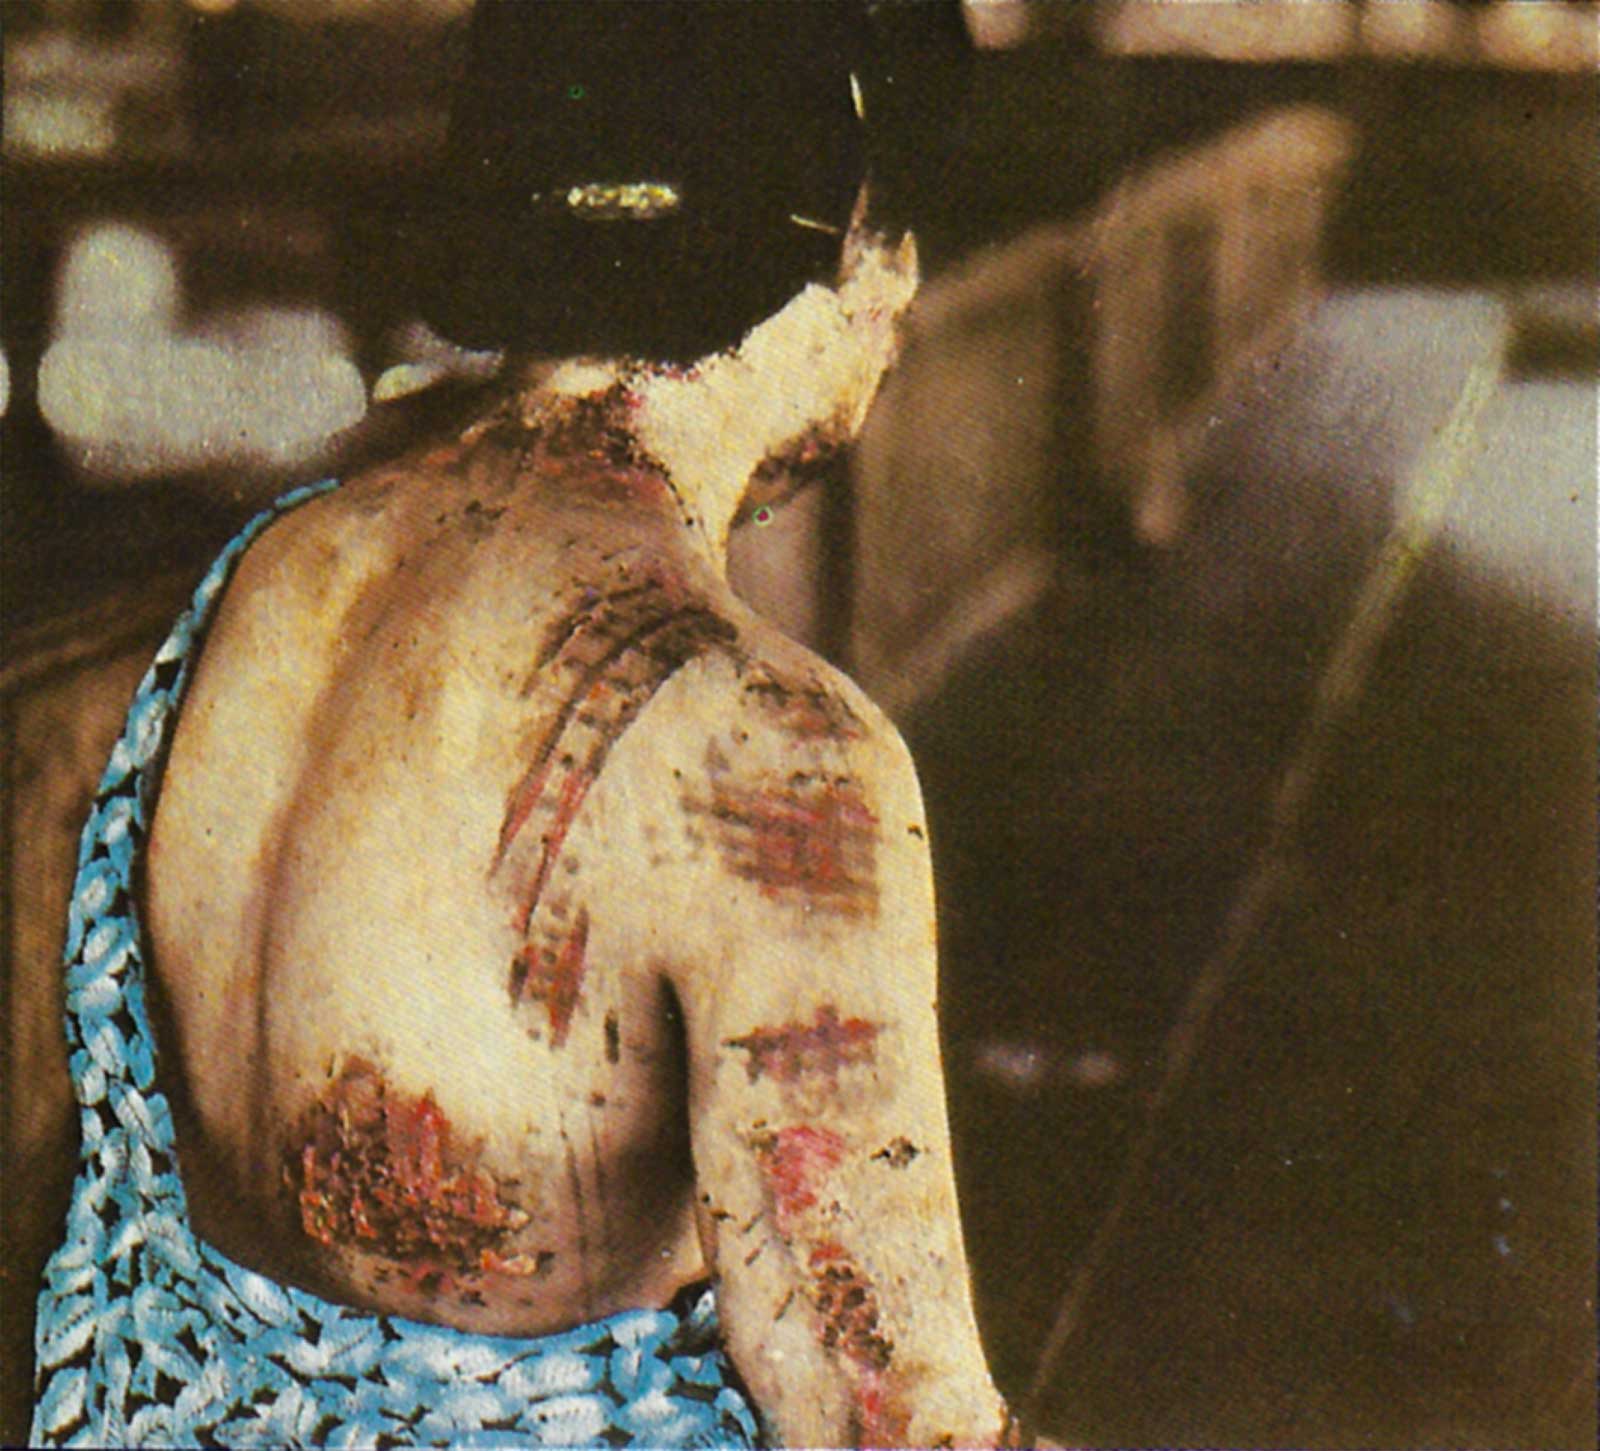 The burns are in a pattern corresponding to the dark portions of the kimono she was wearing at the time of the explosion.